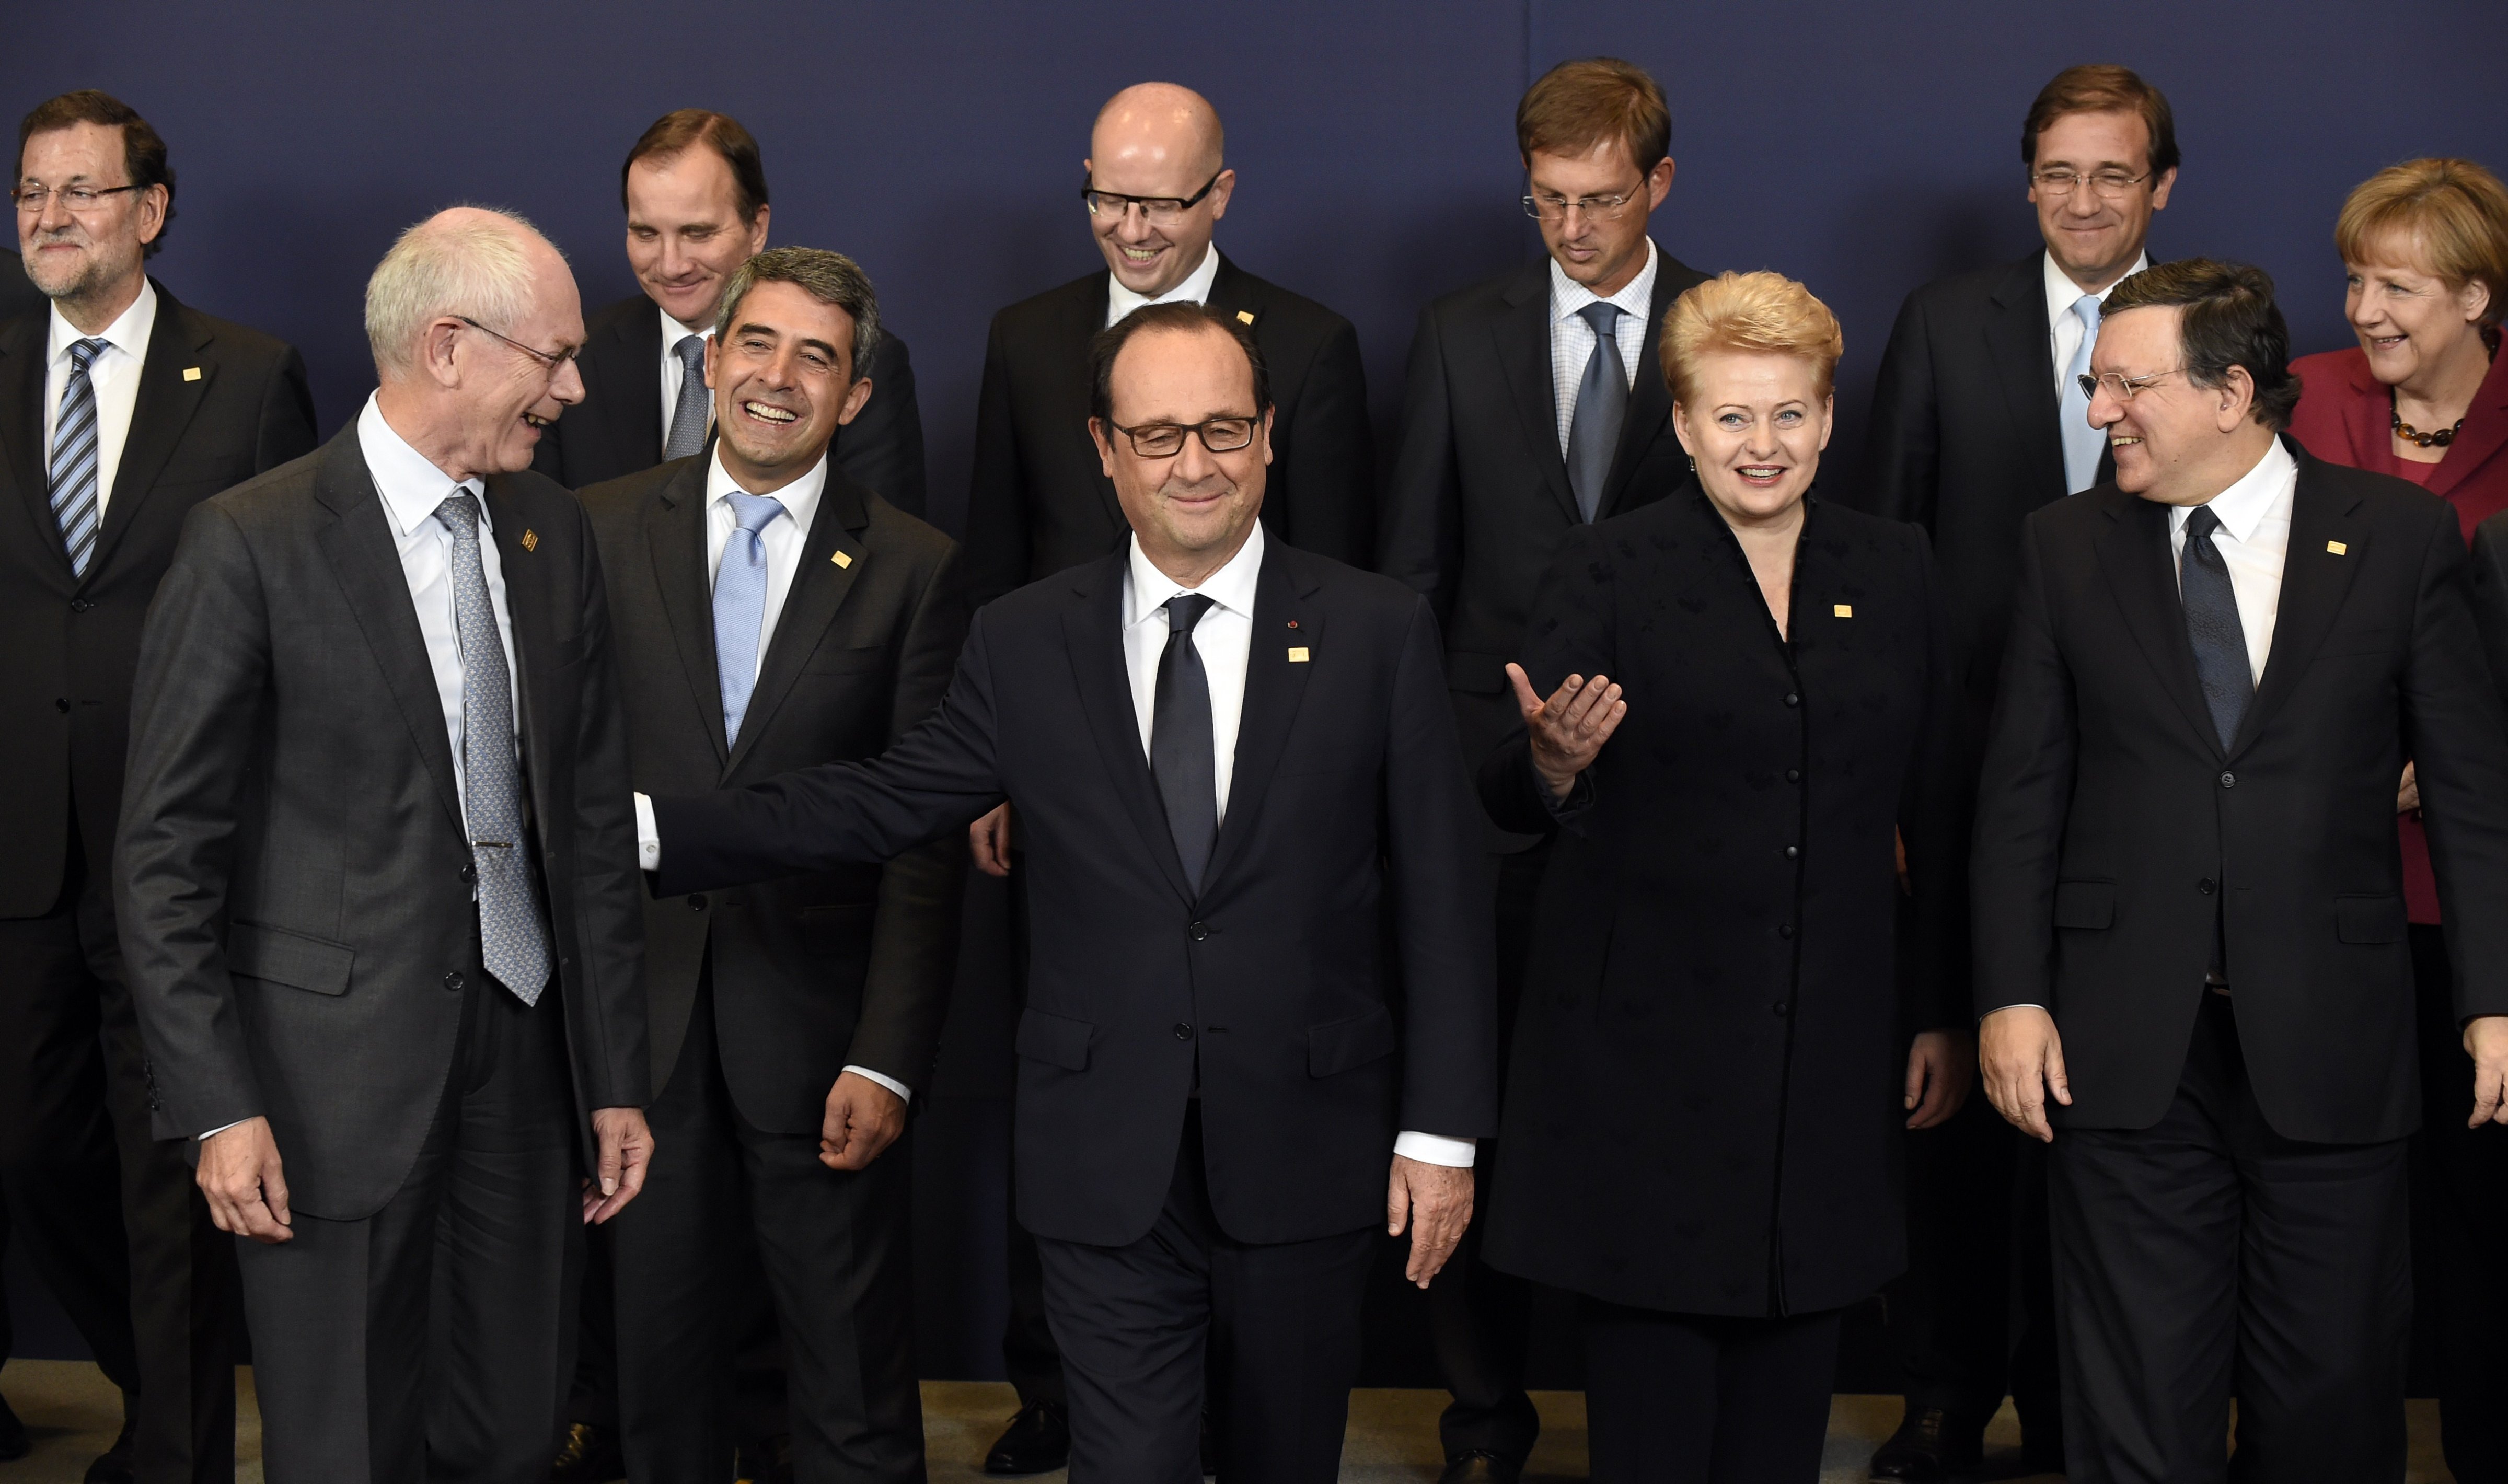 European heads of state and government (from back left) Spanish Prime Minister Mariano Rajoy, Swedish Prime Minister Stefan Loefven, Czech Prime Minister Bohuslav Sobotka, Slovenian Prime Minister Miro Cerar, Portuguese Prime Minister Pedro Passos Coelho and German Chancellor Angela Merkel (from front left) European Council President Herman Van Rompuy, Bulgarian President  Rosen Plevneliev, French President  Francois Hollande, Lithuanian President Dalia Grybauskaite and European Commission President Jose Manuel Barroso talk before a family photo during a European Union summit at the EU headquarters in Brussels on Oct 23, 2014.